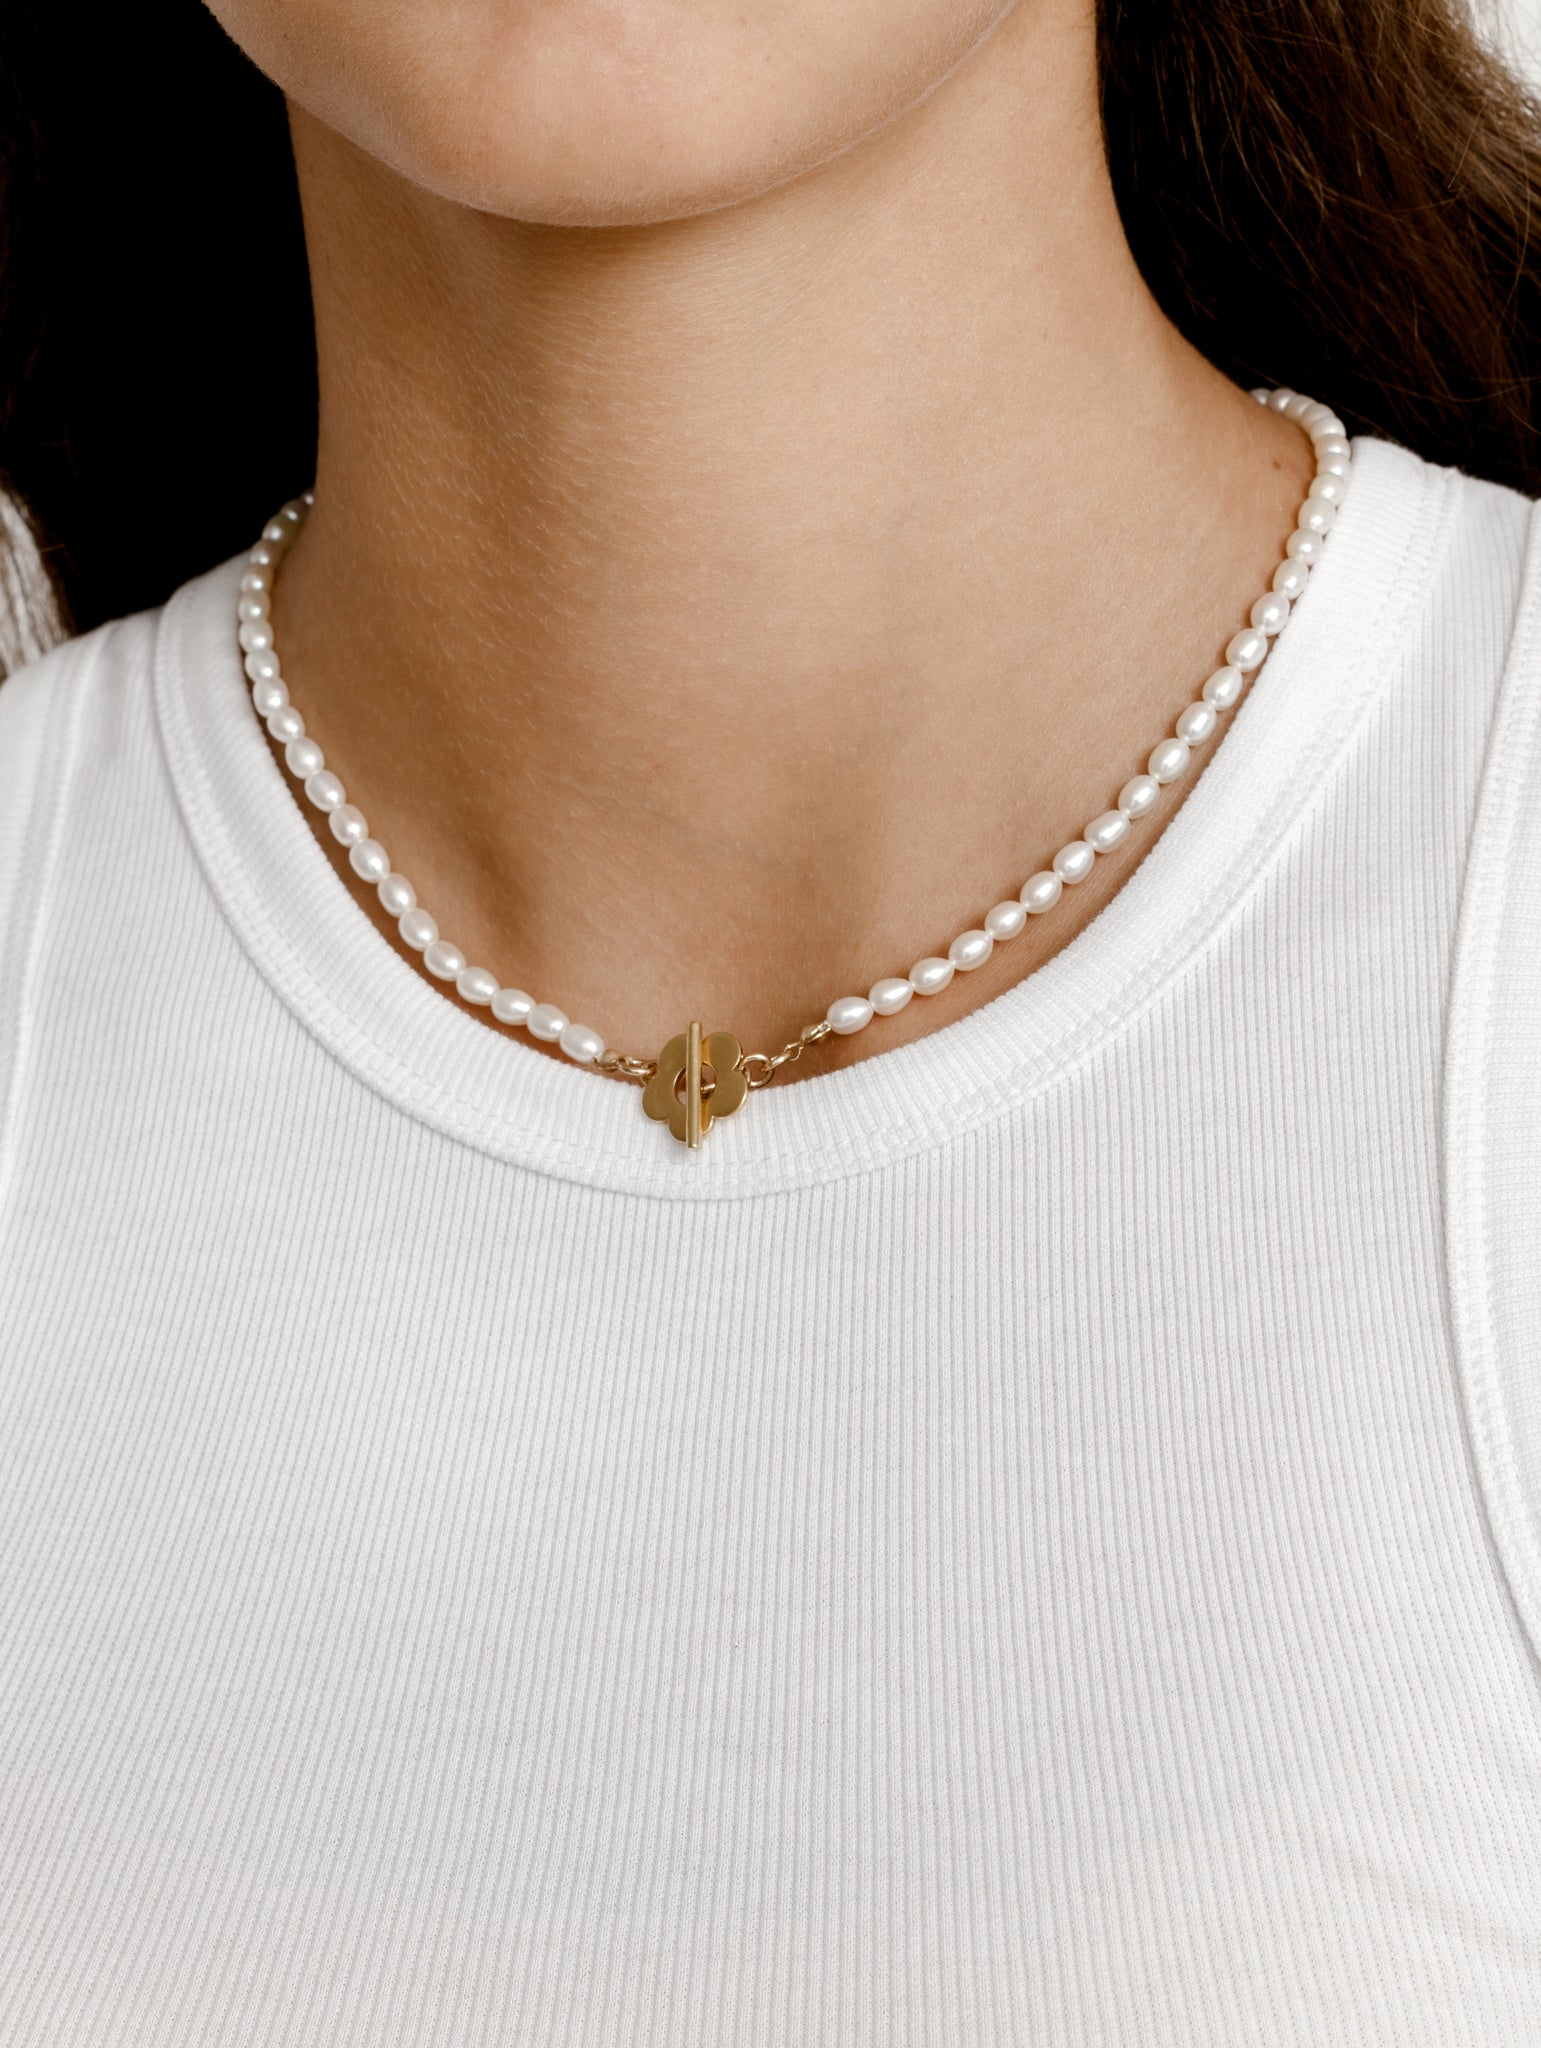 Sofia Pearl Necklace in Gold